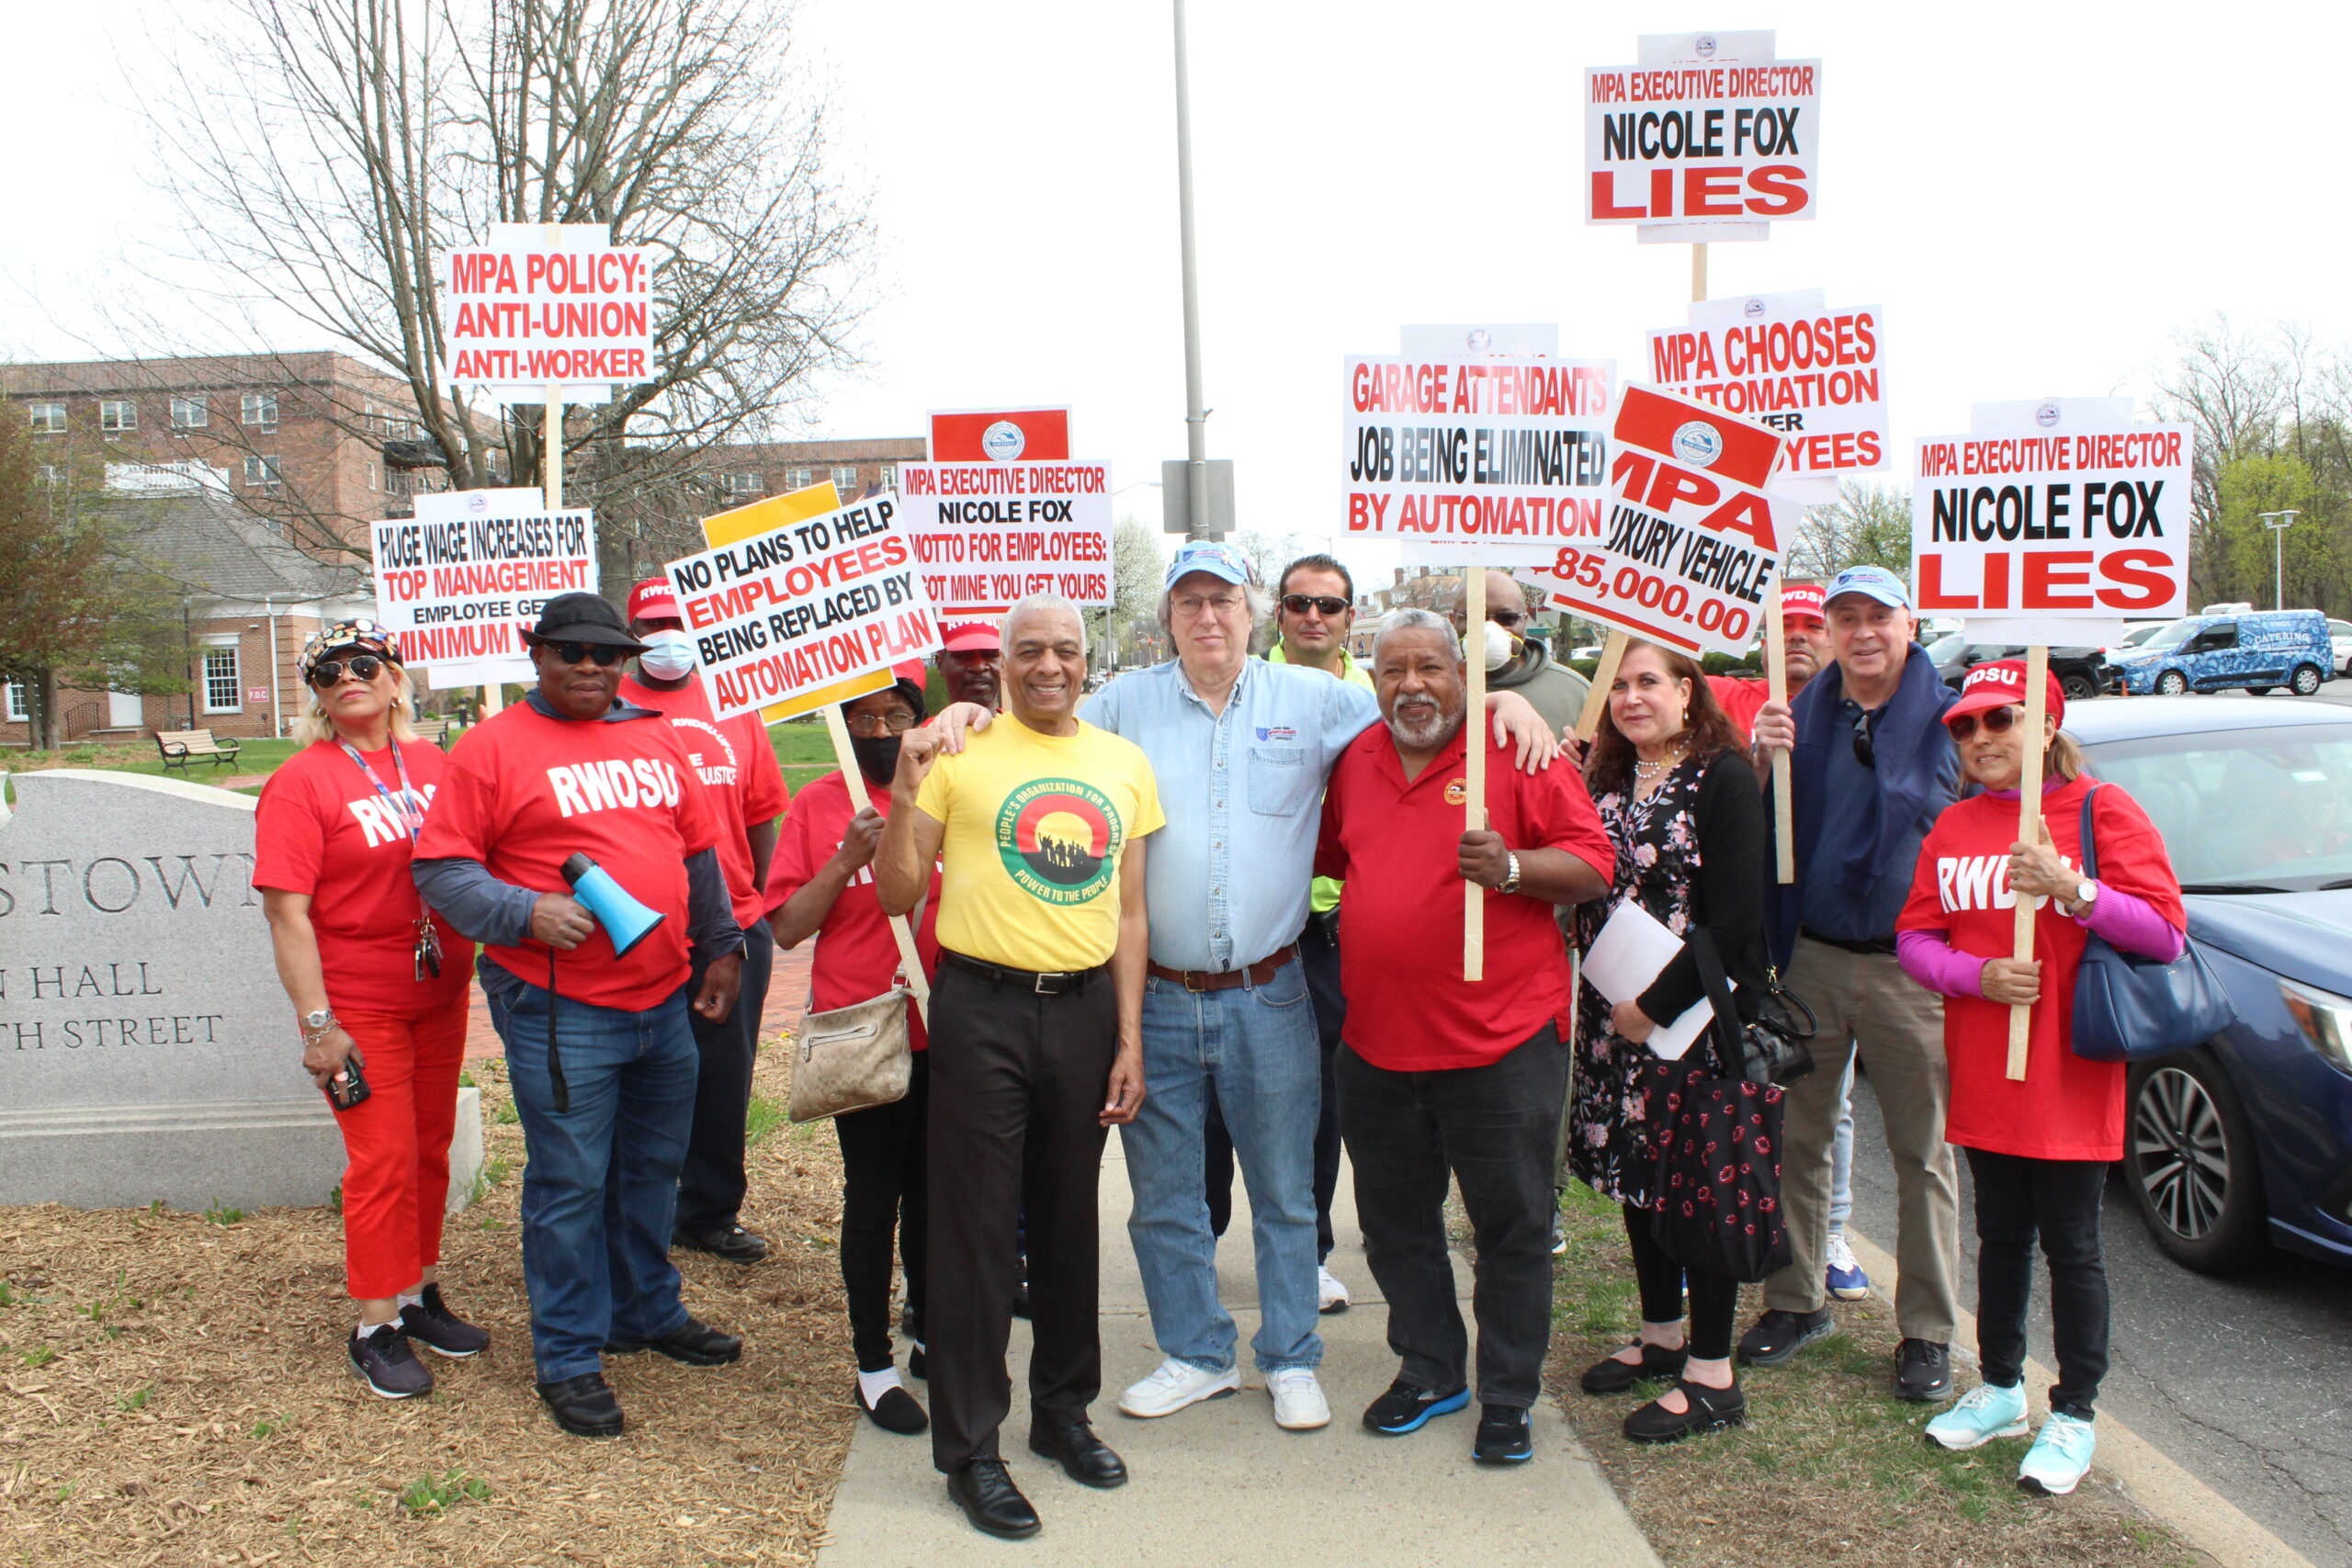 "New Jersey Workers Protest Against the Implementation of Automation in the Workplace"